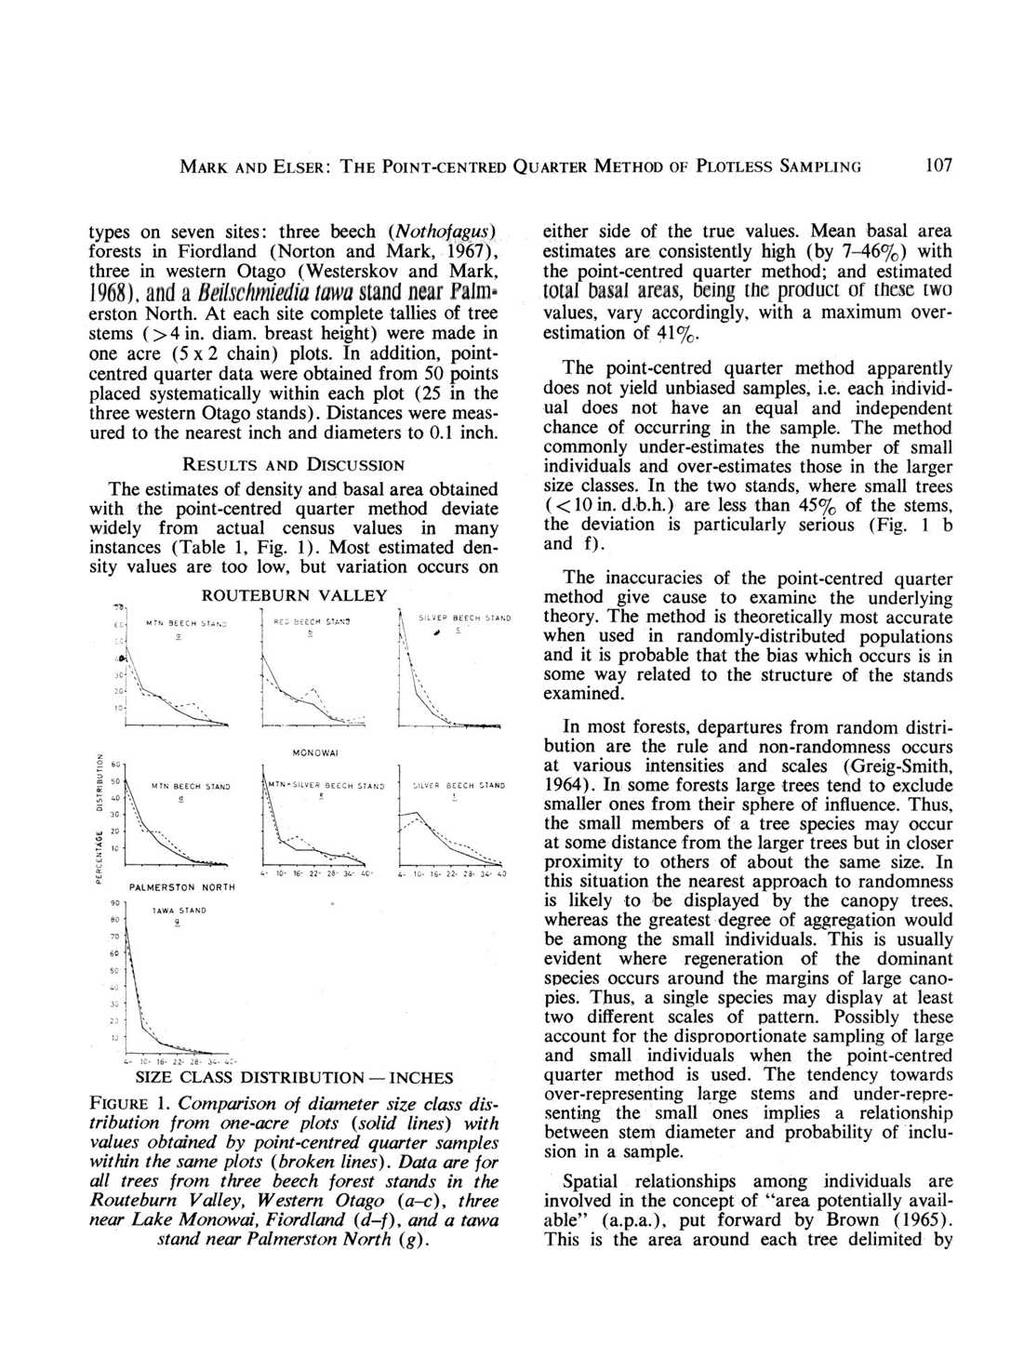 MARK AND ELSER: THE POINT-CENTRED QUARTER METHOD OF PLOTLESS SAMPLING 107 types on seven sites: three beech (NothoflJgu~) forests in Fiordland (Norton and Mark, 1967), three in western Otago